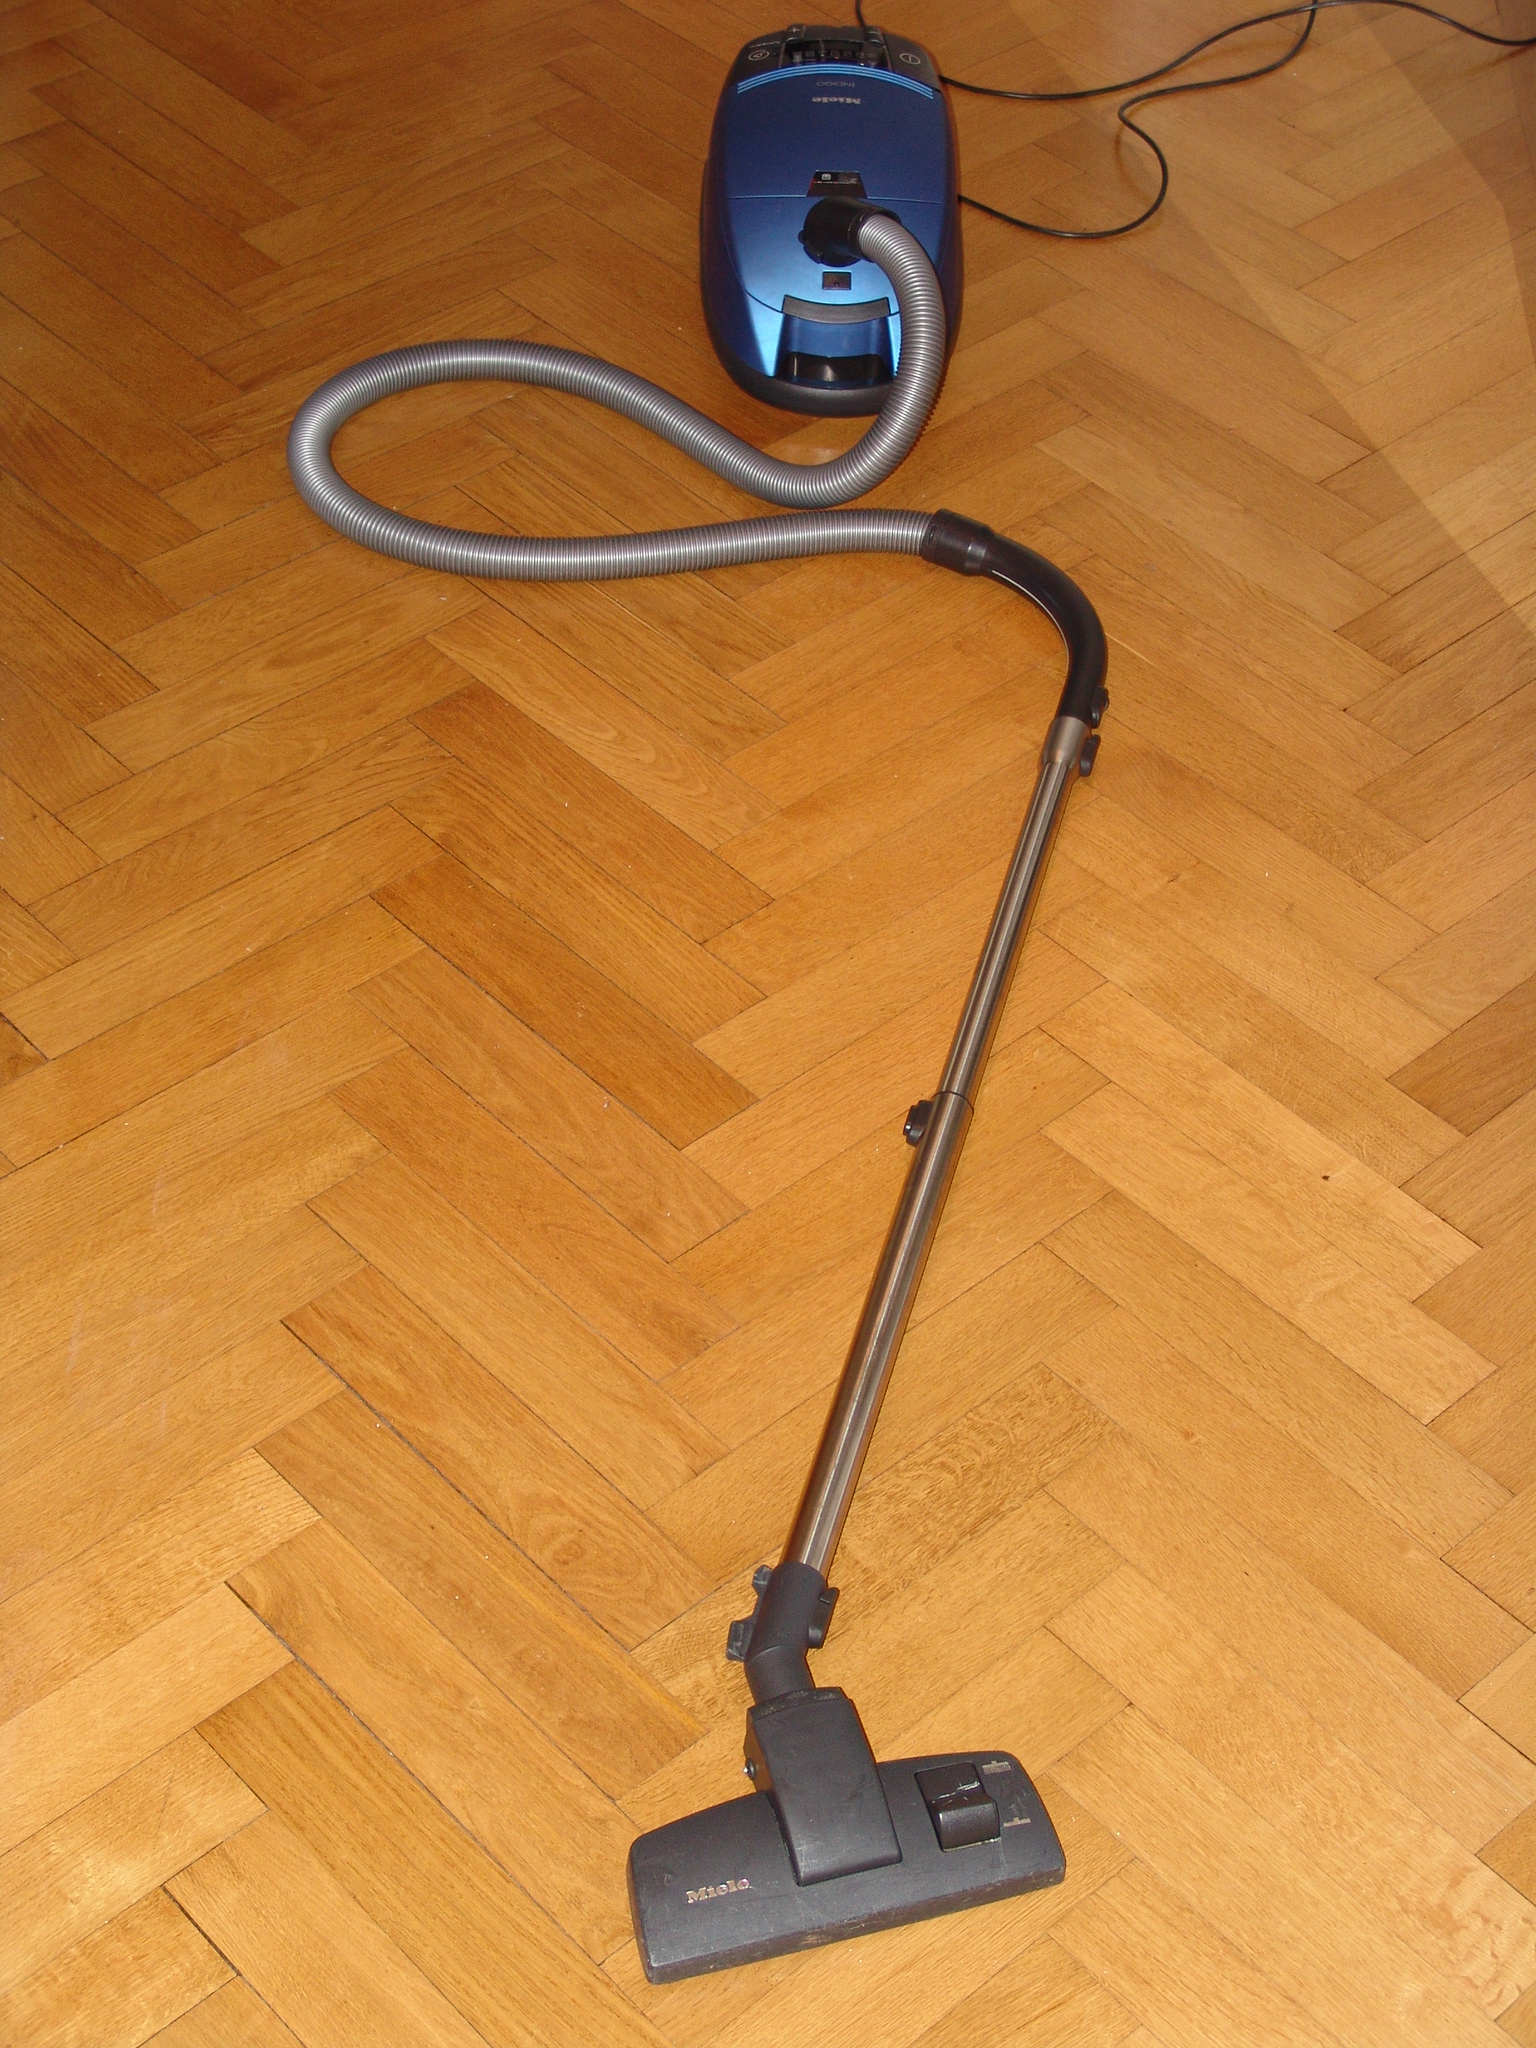 What is the best hard floor cleaner?